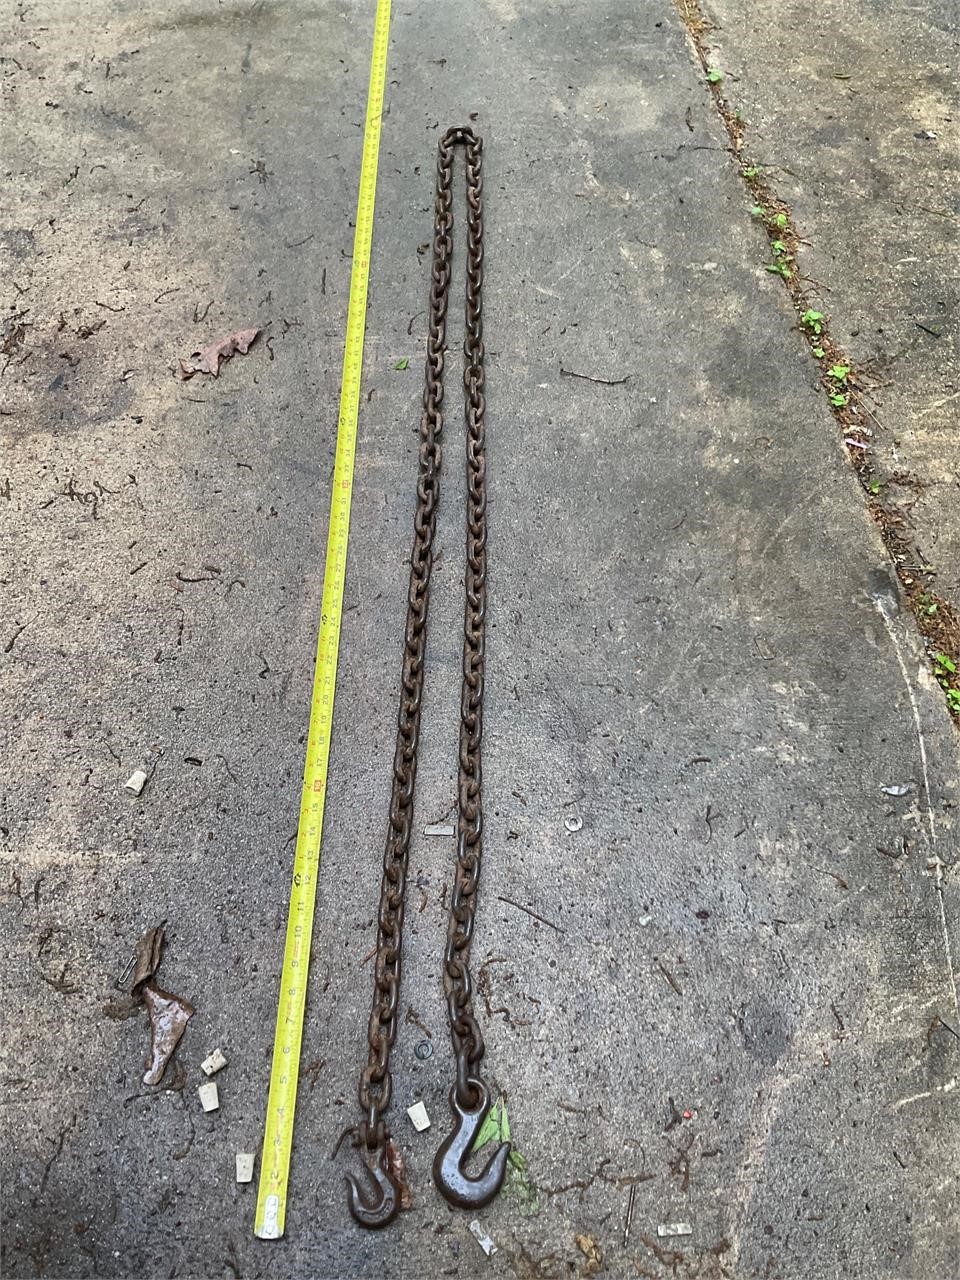 10 ft Chain with Hooks on Both Ends